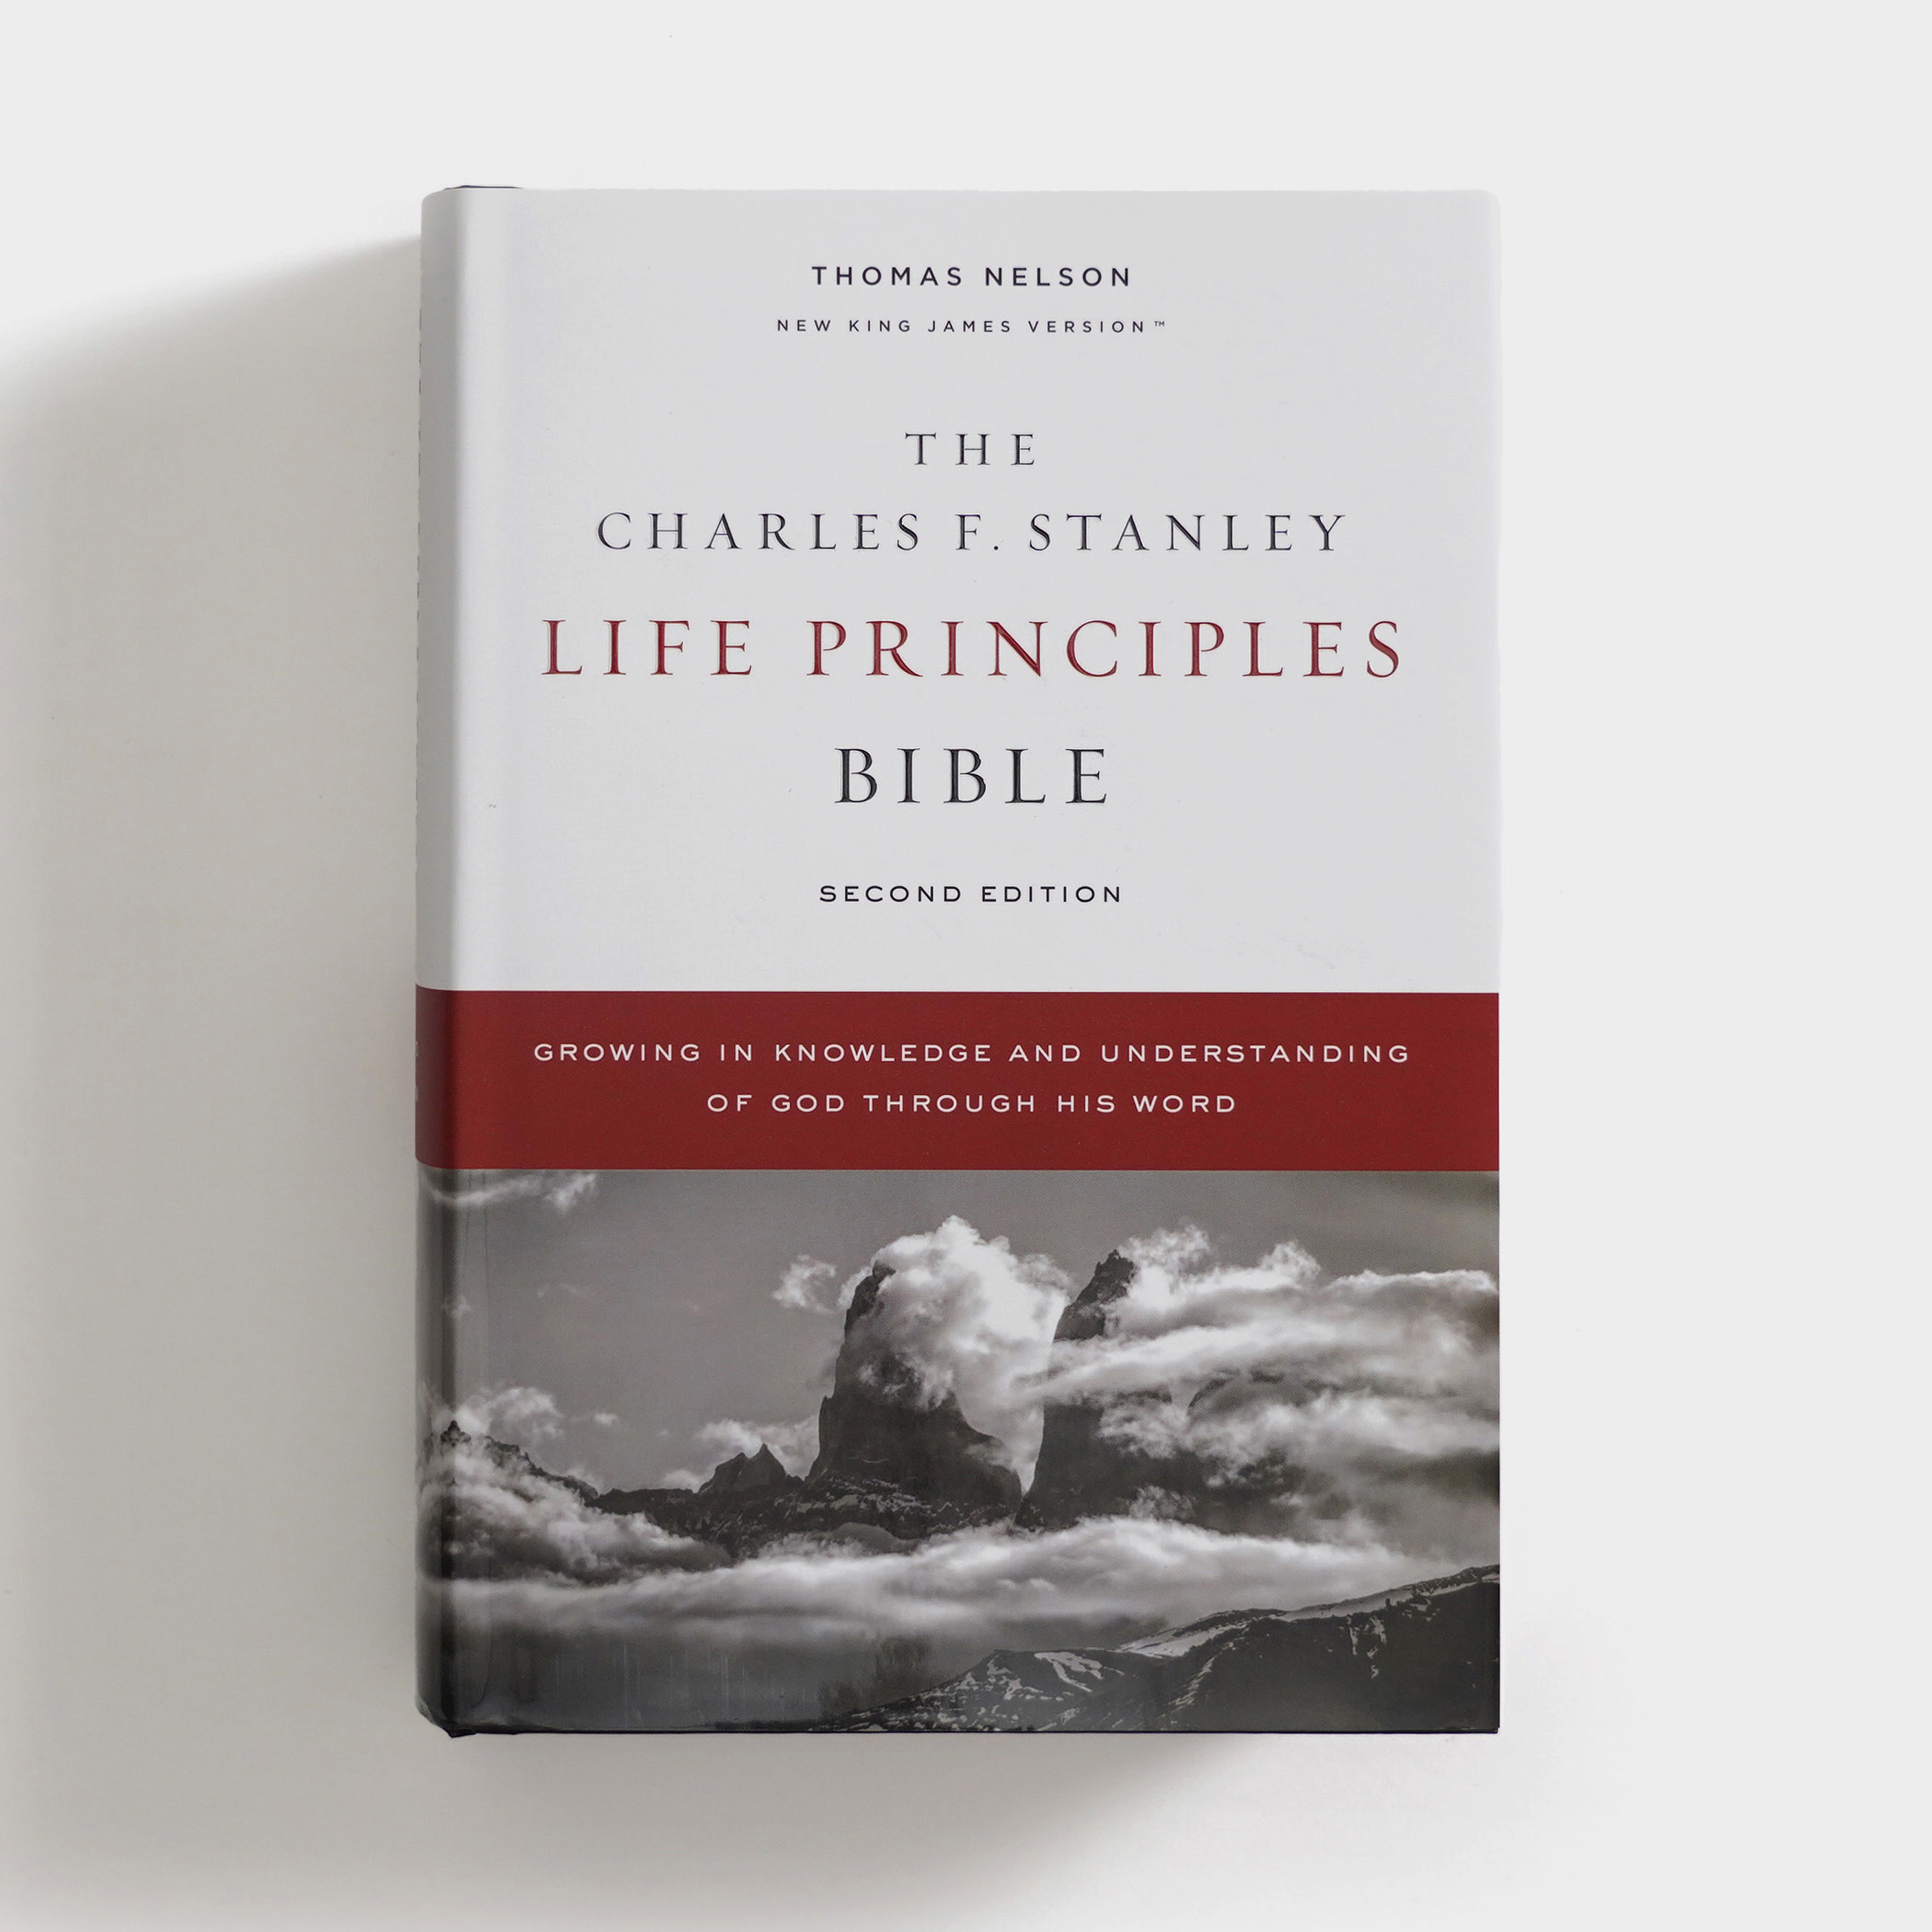 The Charles F. Stanley Life Principles Bible 2nd Edition, NKJV - Hardcover